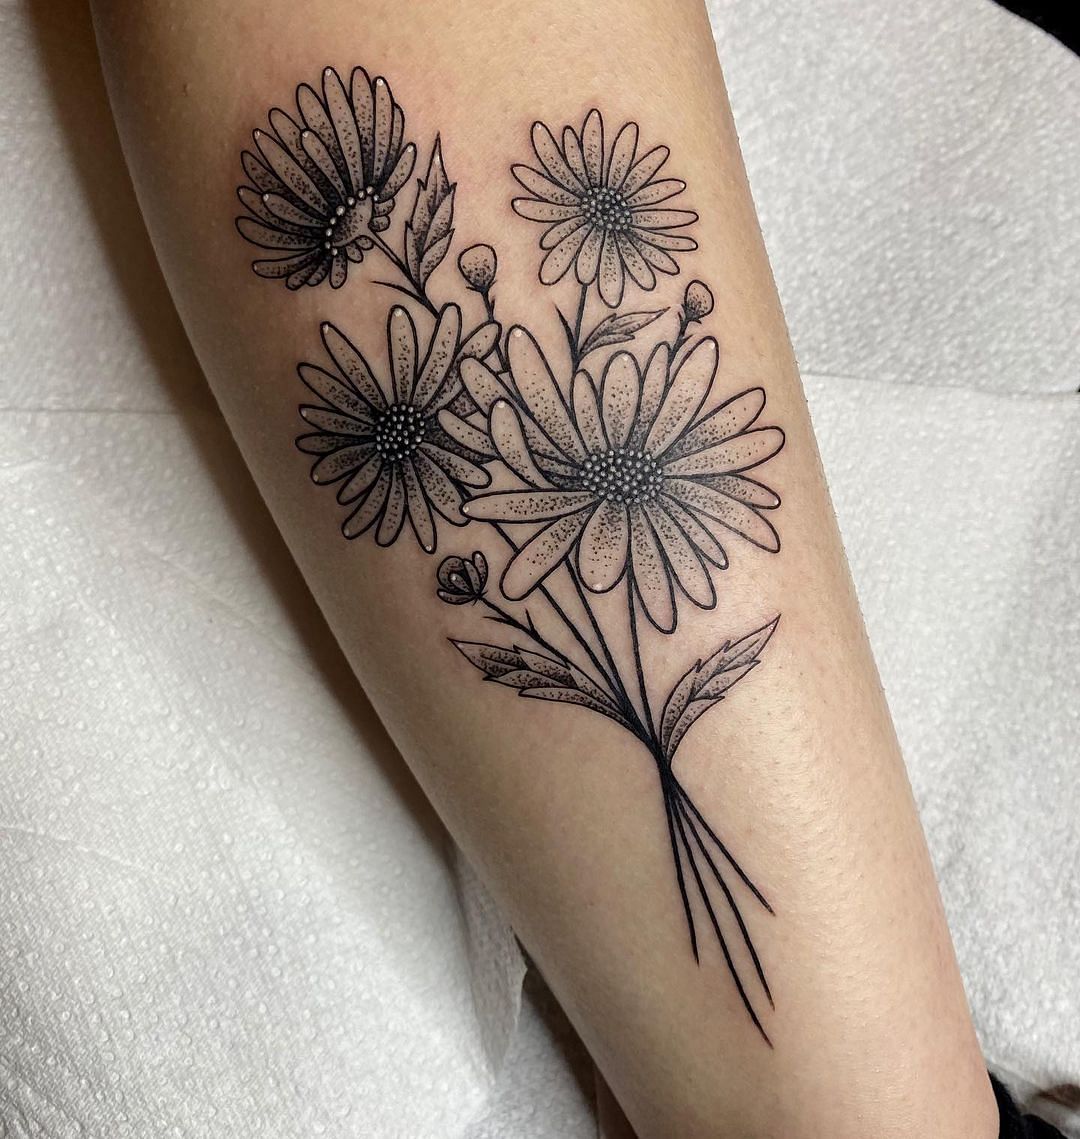 Daisy Tattoo Designs And Daisy Tattoo MeaningsDaisy Tattoo Ideas And Tattoo  Pictures  HubPages